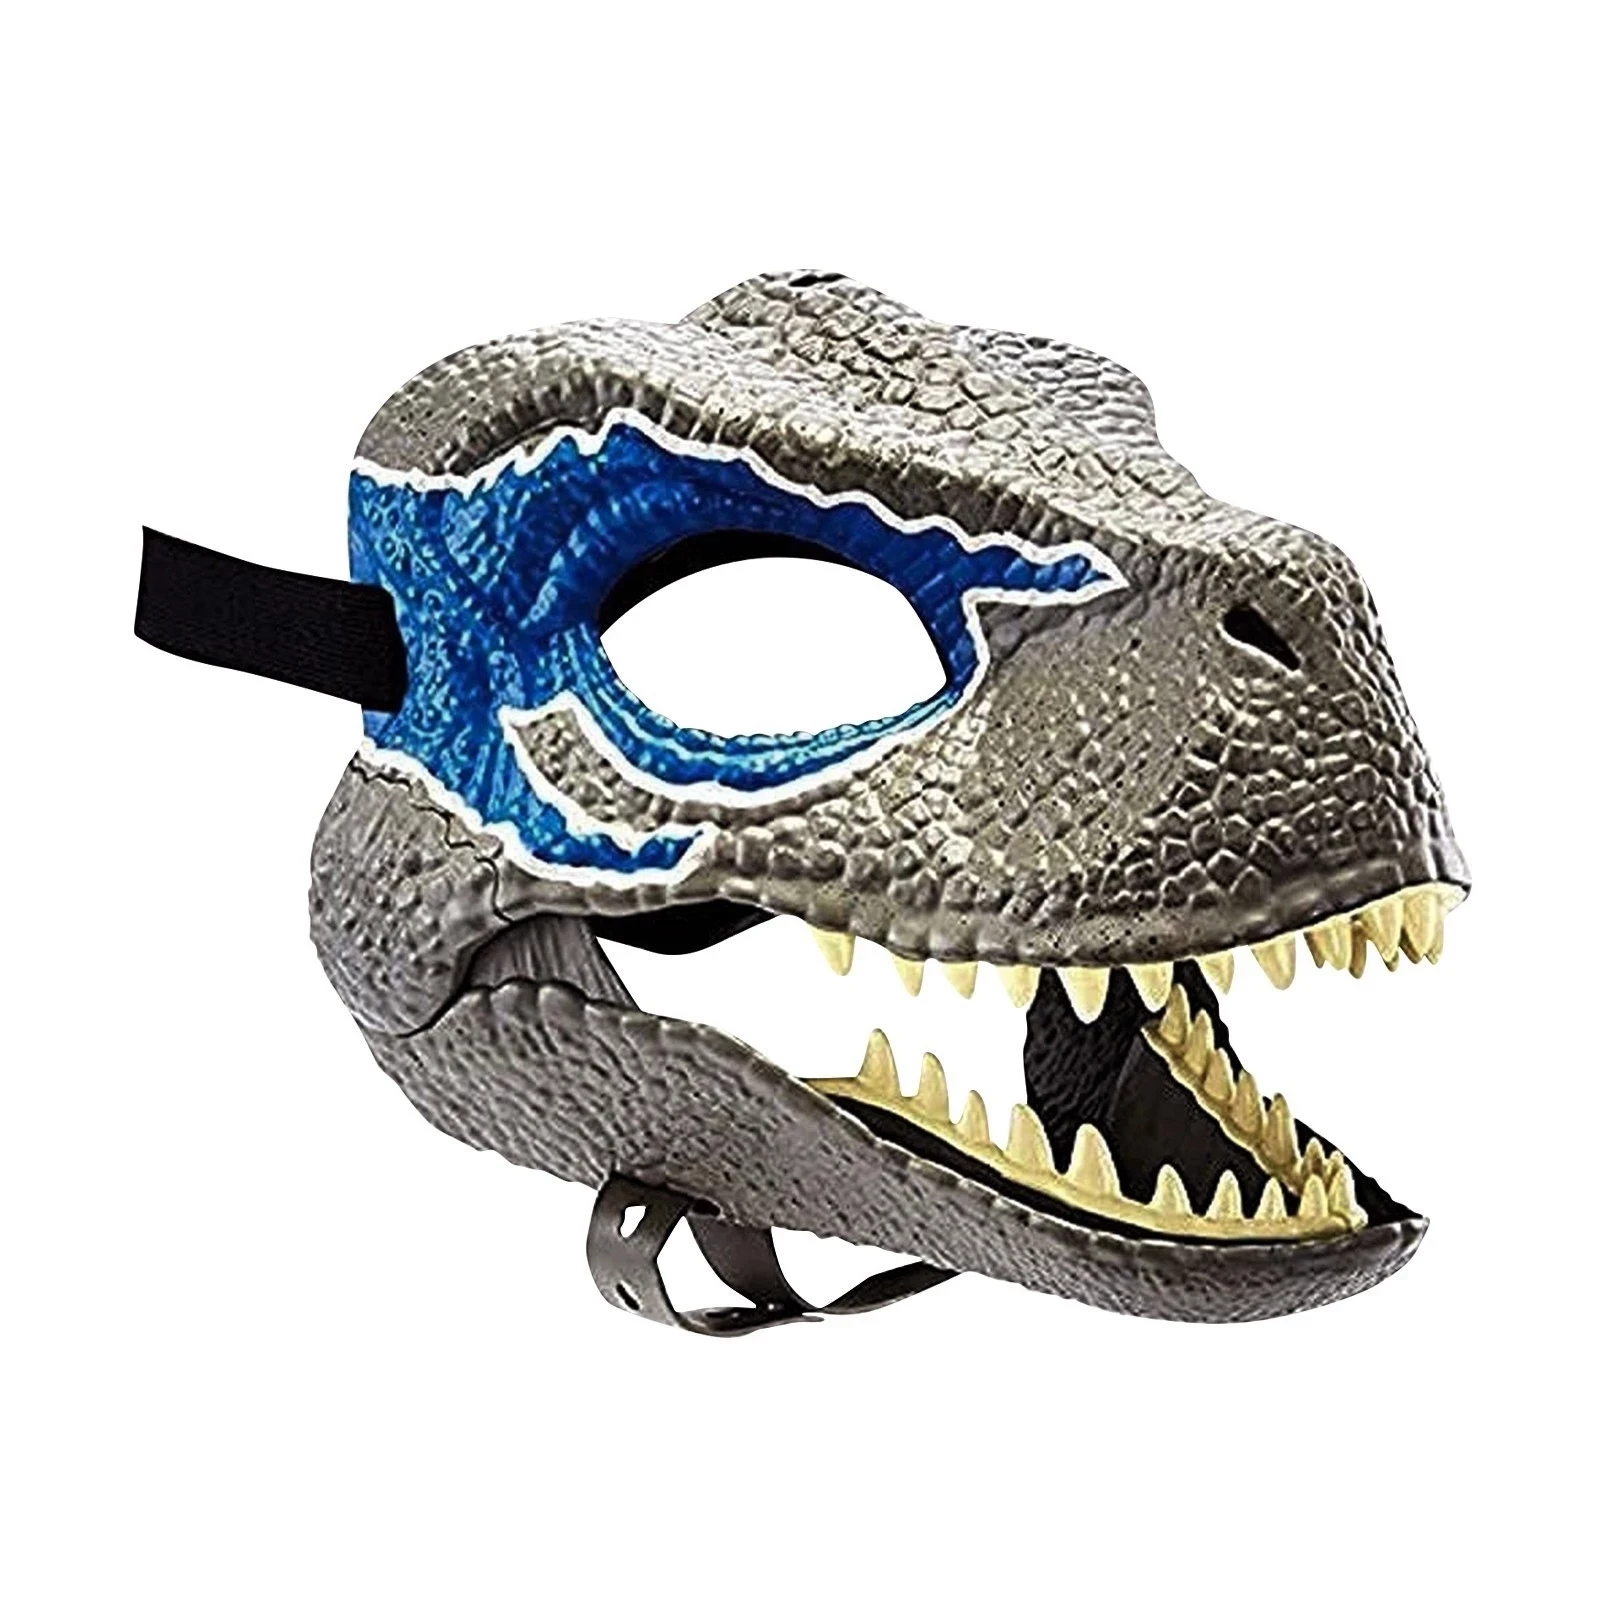 scary halloween costumes Dragon Dinosaur Jaw Mask Open Mouth Latex Horror Dinosaur Headgear Dino Mask Halloween Party Cosplay Props Scared Mask cowboy halloween costume